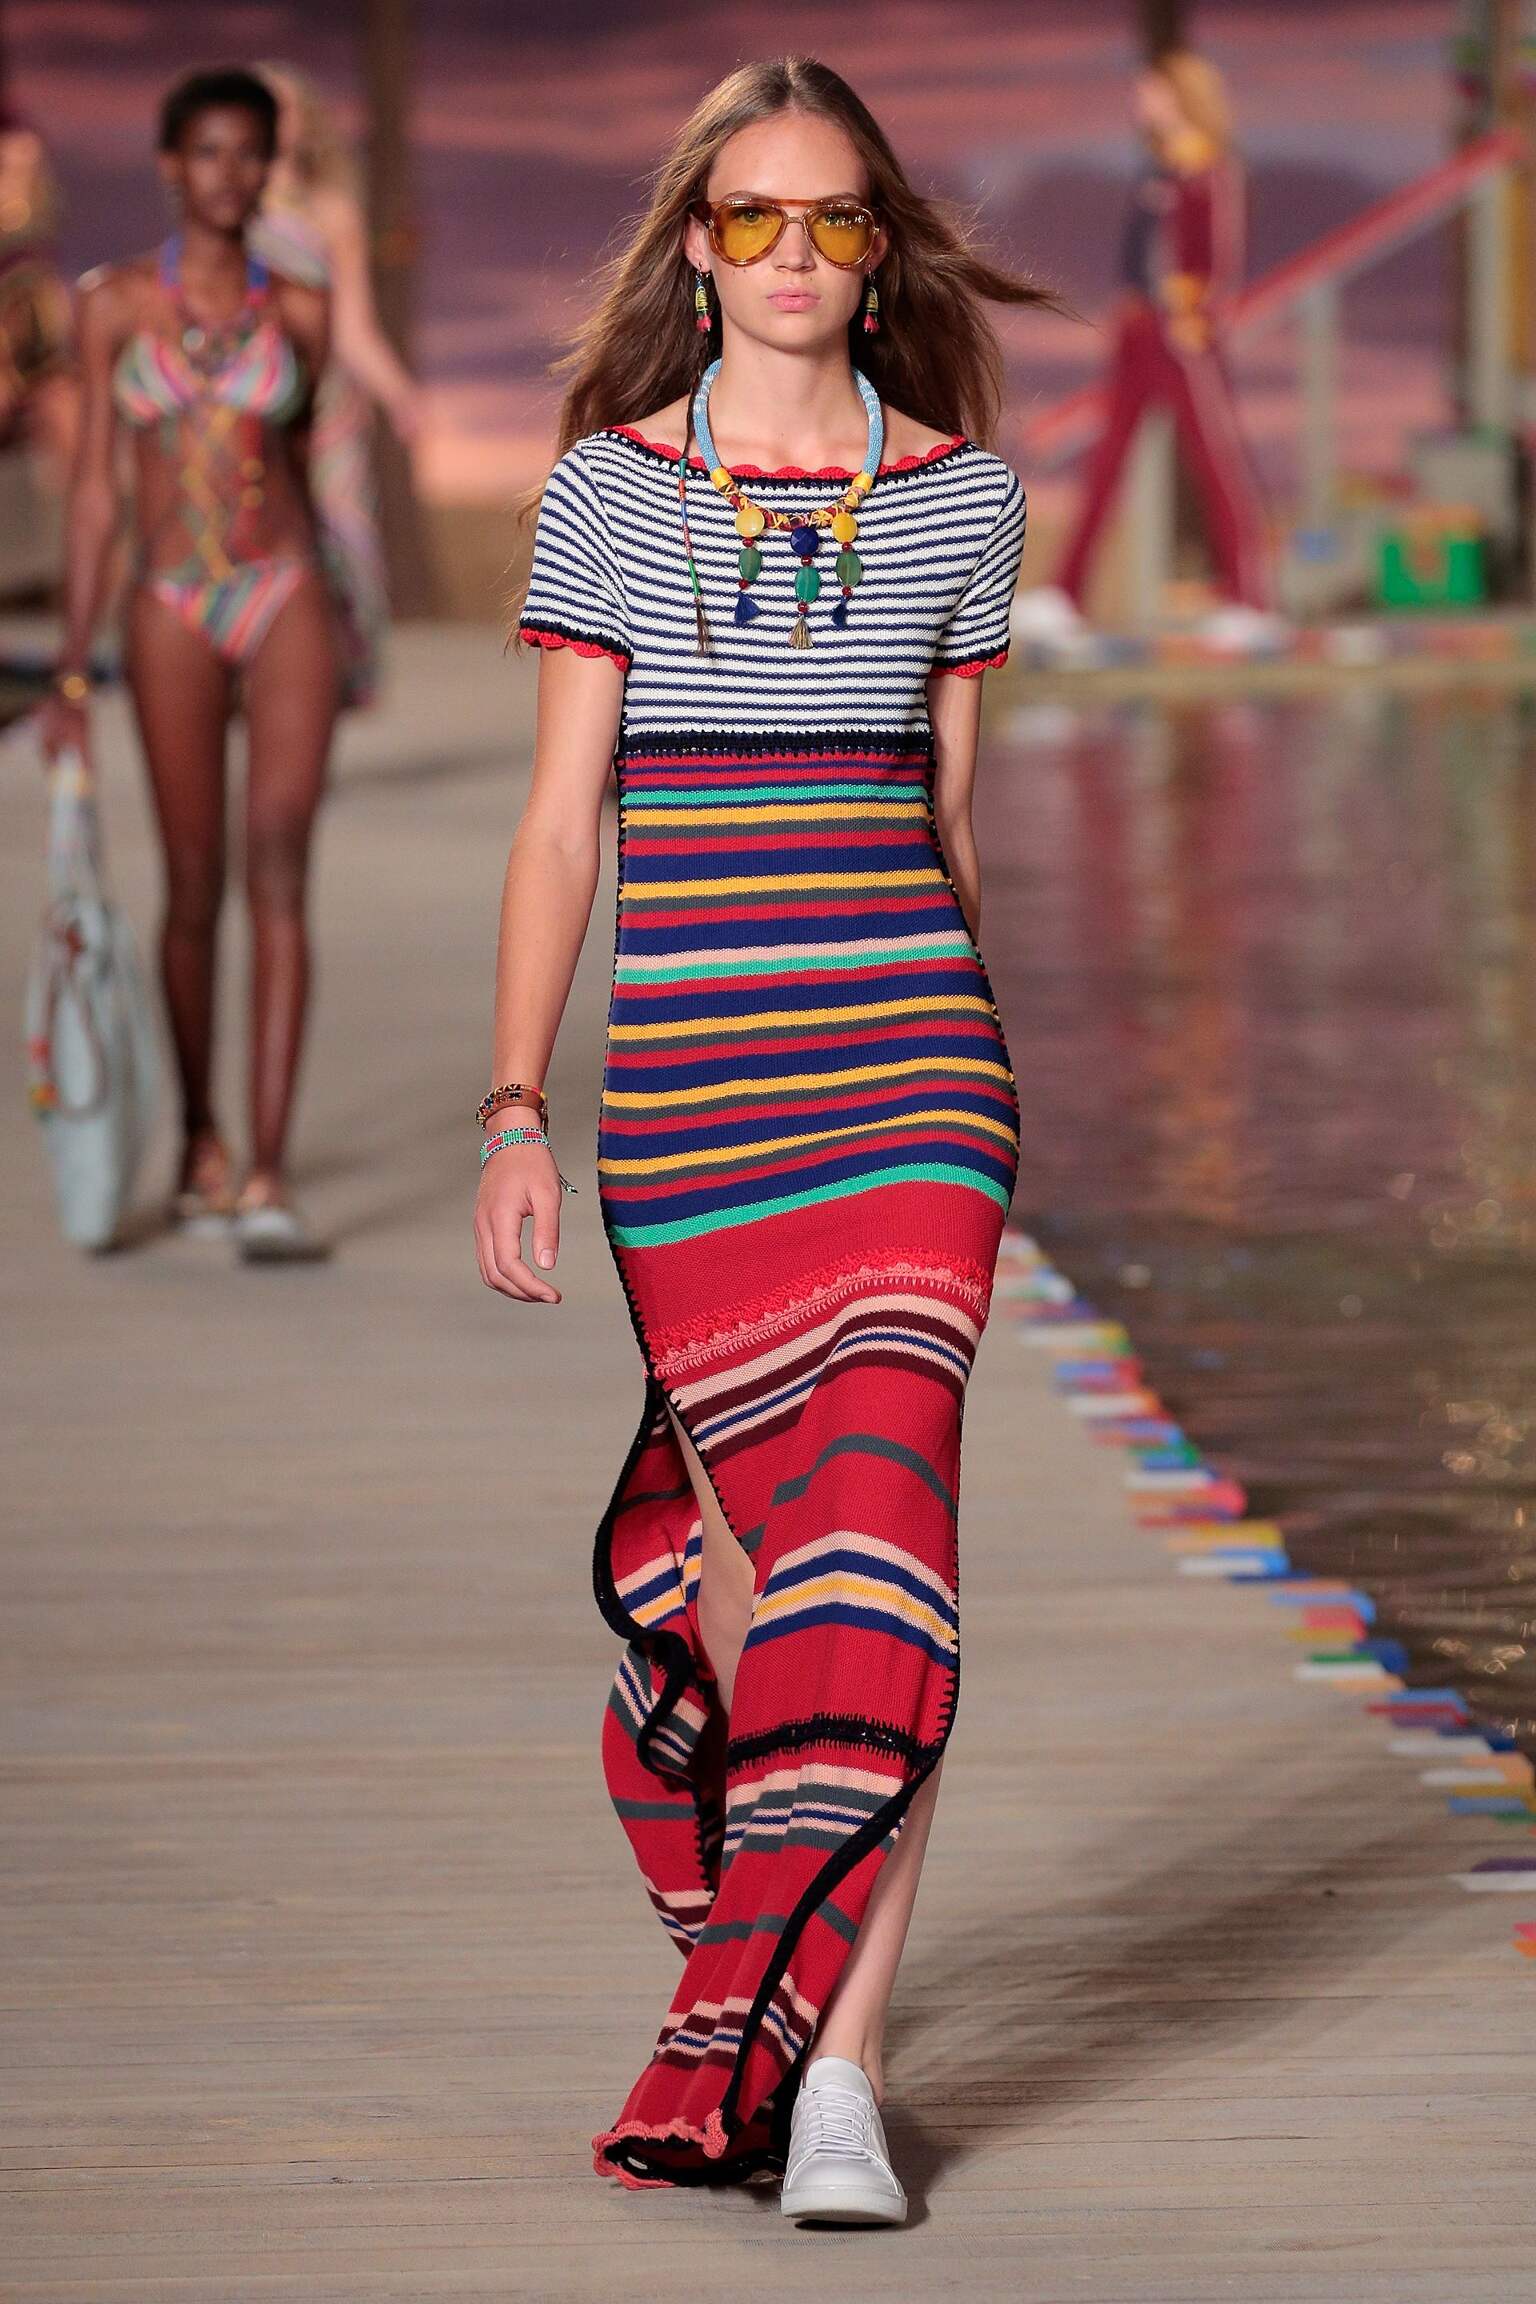 TOMMY HILFIGER SPRING SUMMER 2016 WOMEN'S COLLECTION | The ...